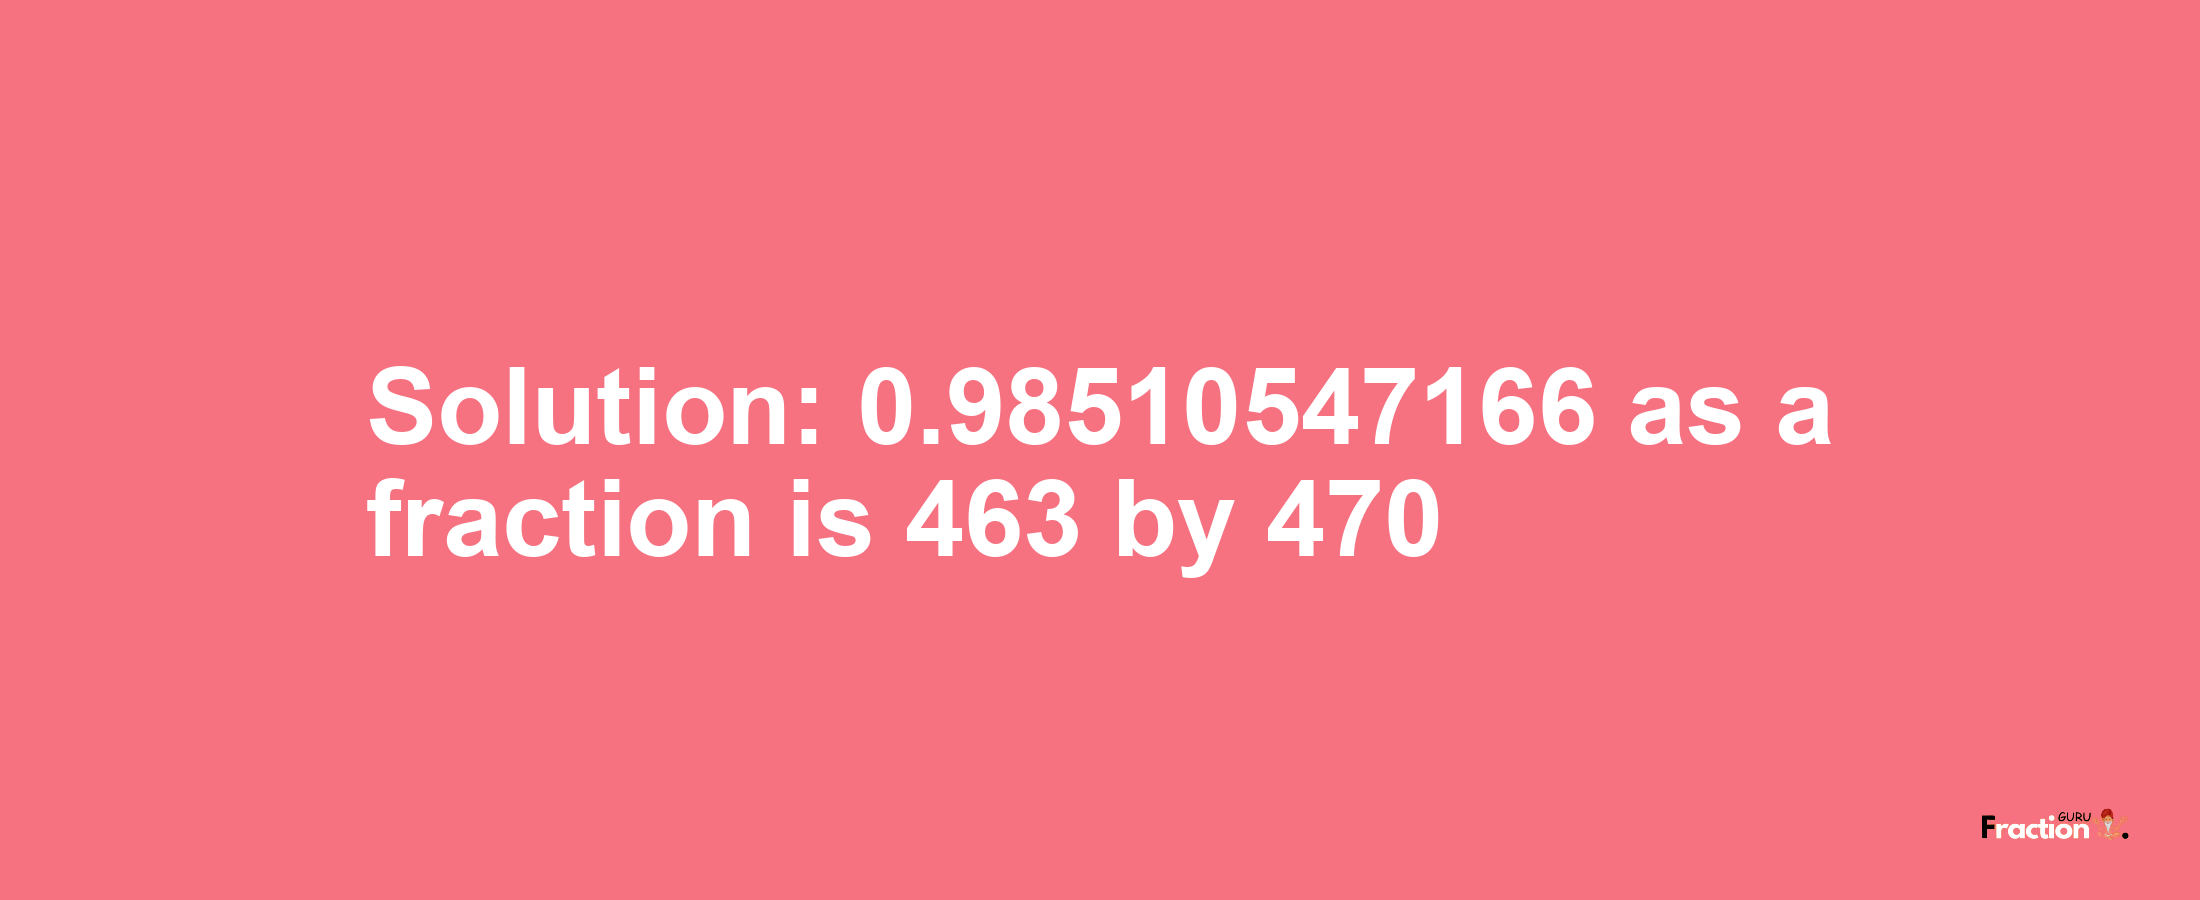 Solution:0.98510547166 as a fraction is 463/470